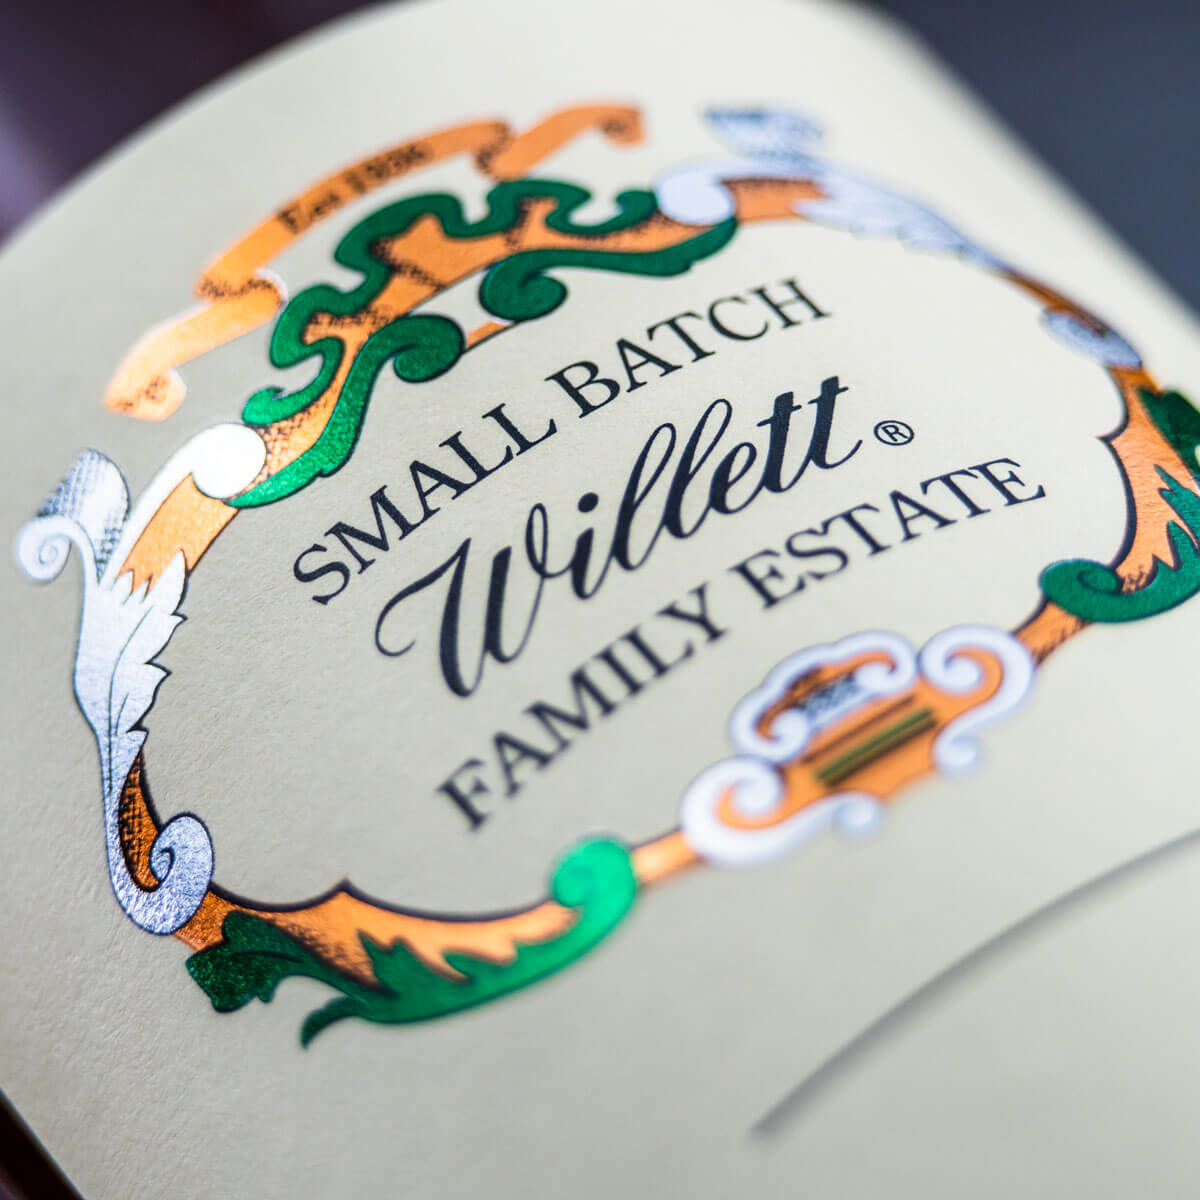 Back label detail specifying "small batch"